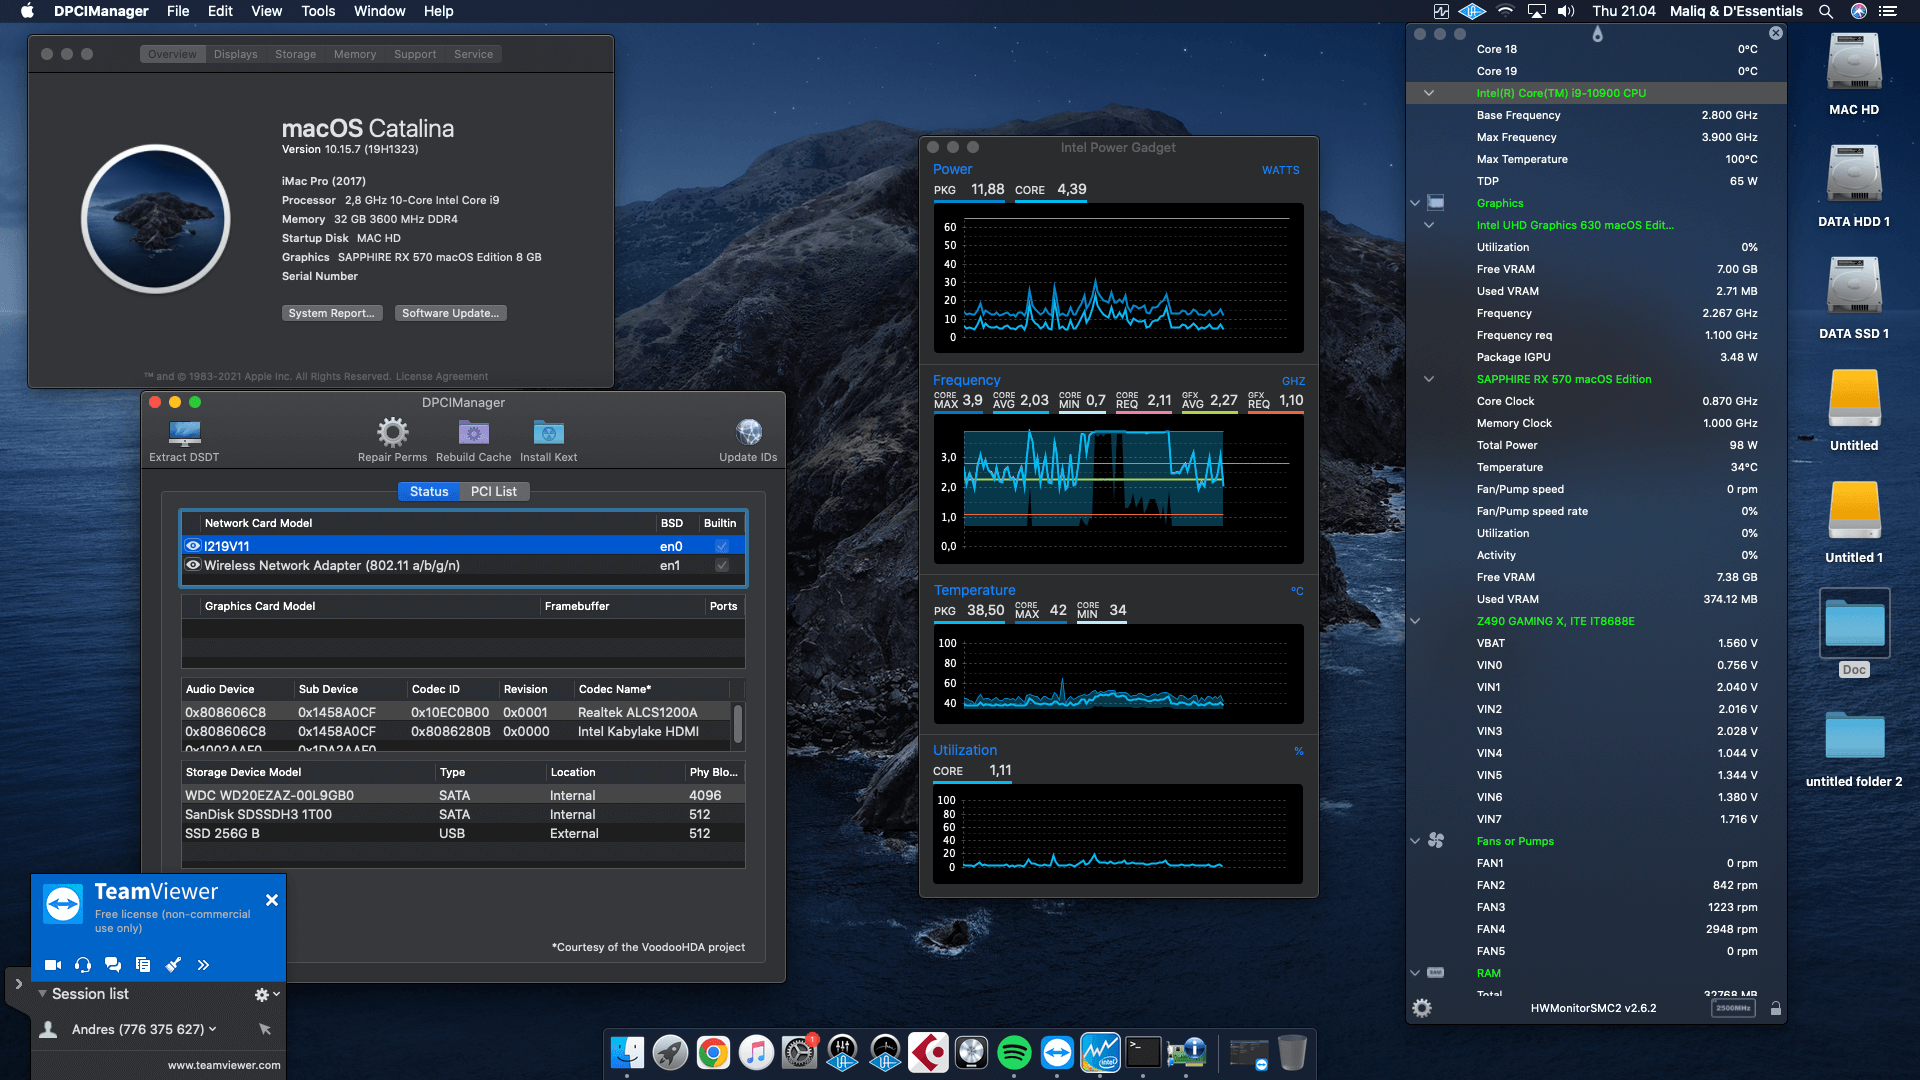 Success Hackintosh macOS Catalina 10.15.7 Build 19H1323 in Gigabyte Z490 Gaming X + Intel Core i9 10900 + Sapphire RX 570